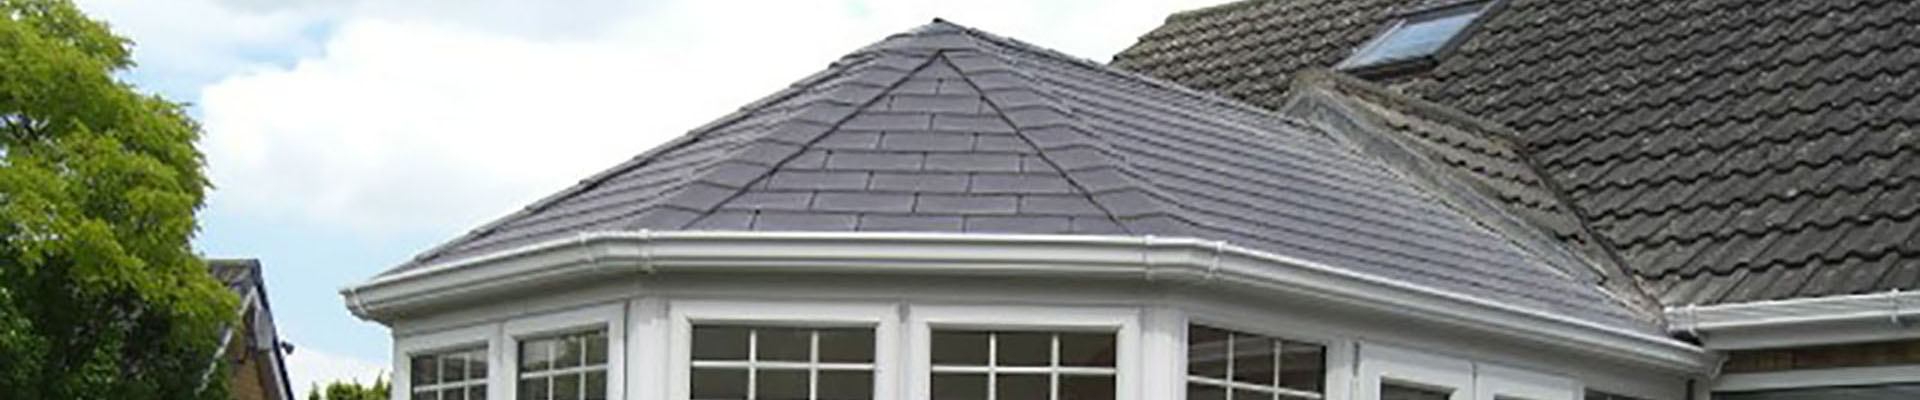 Solid Roofs by Mirage of Lancaster